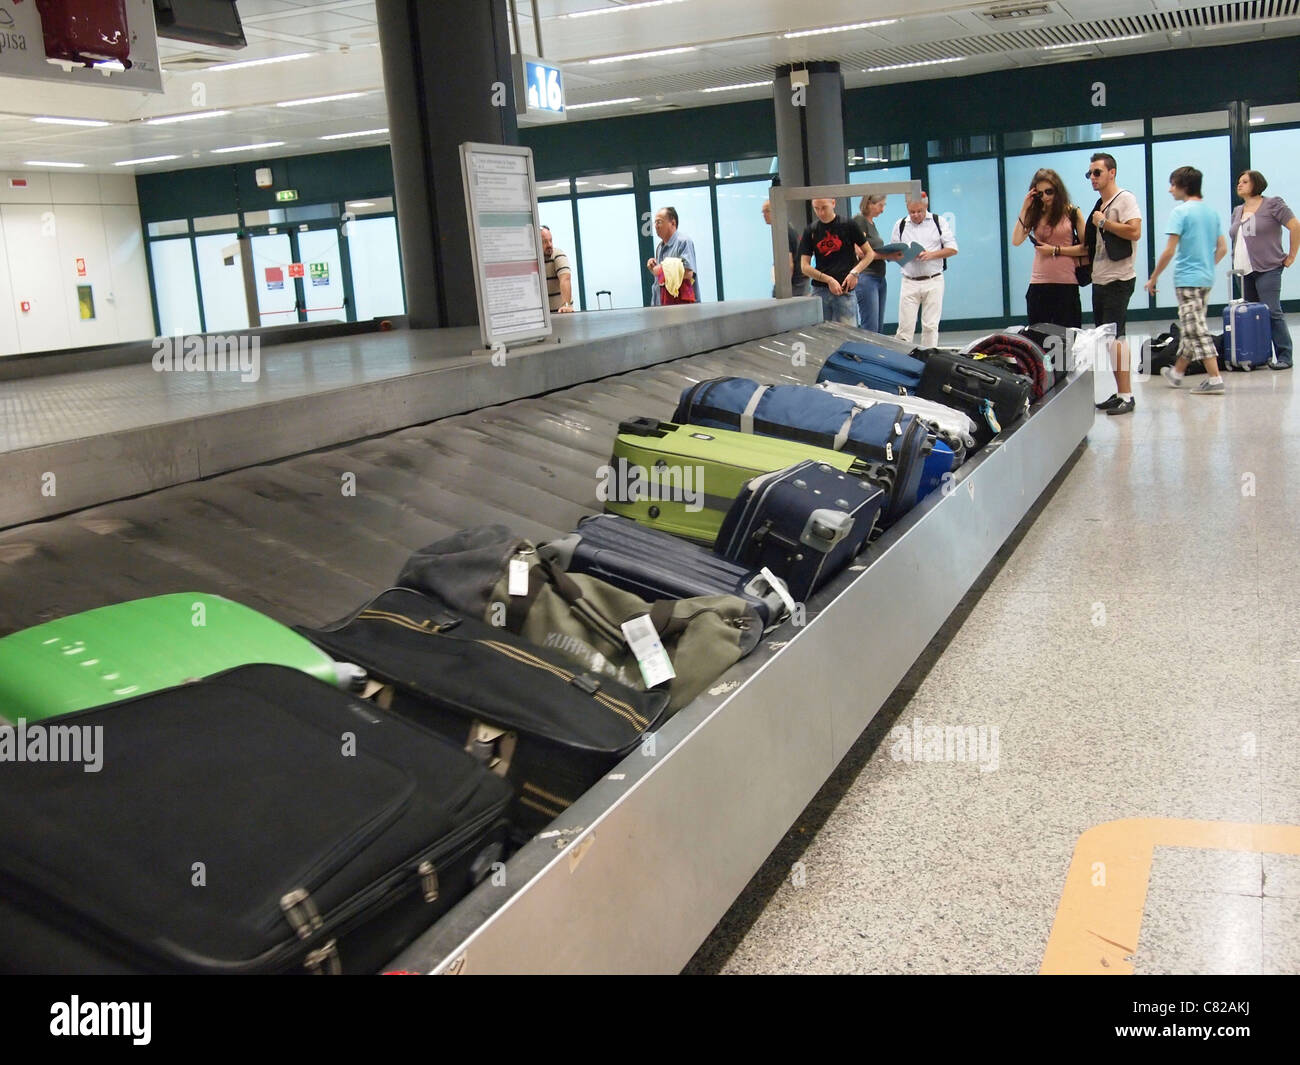 Waiting for luggage and suitcases at a baggage carousel claim, Fiumicino Airport, Rome, Italy Stock Photo